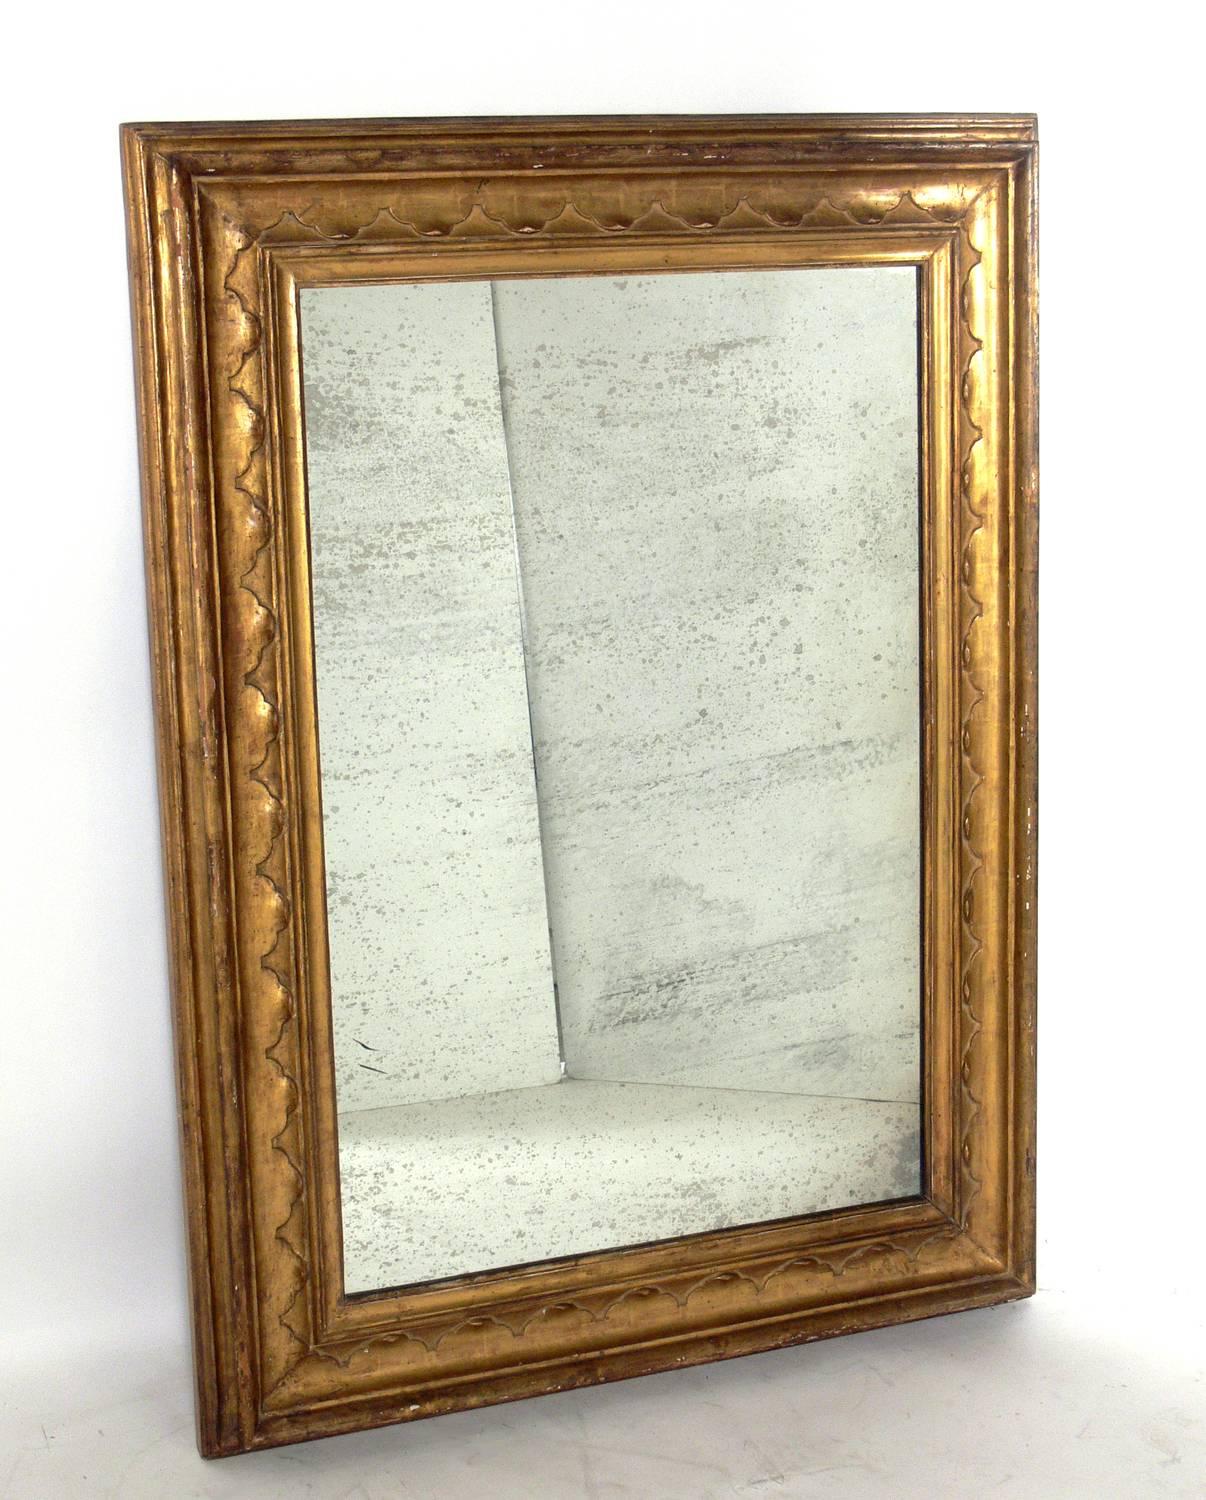 Large Scale 19th Century Gilt Mirror, probably American, circa early 1800s. Both the gilt frame and the mirrored glass retain a wonderful patina.